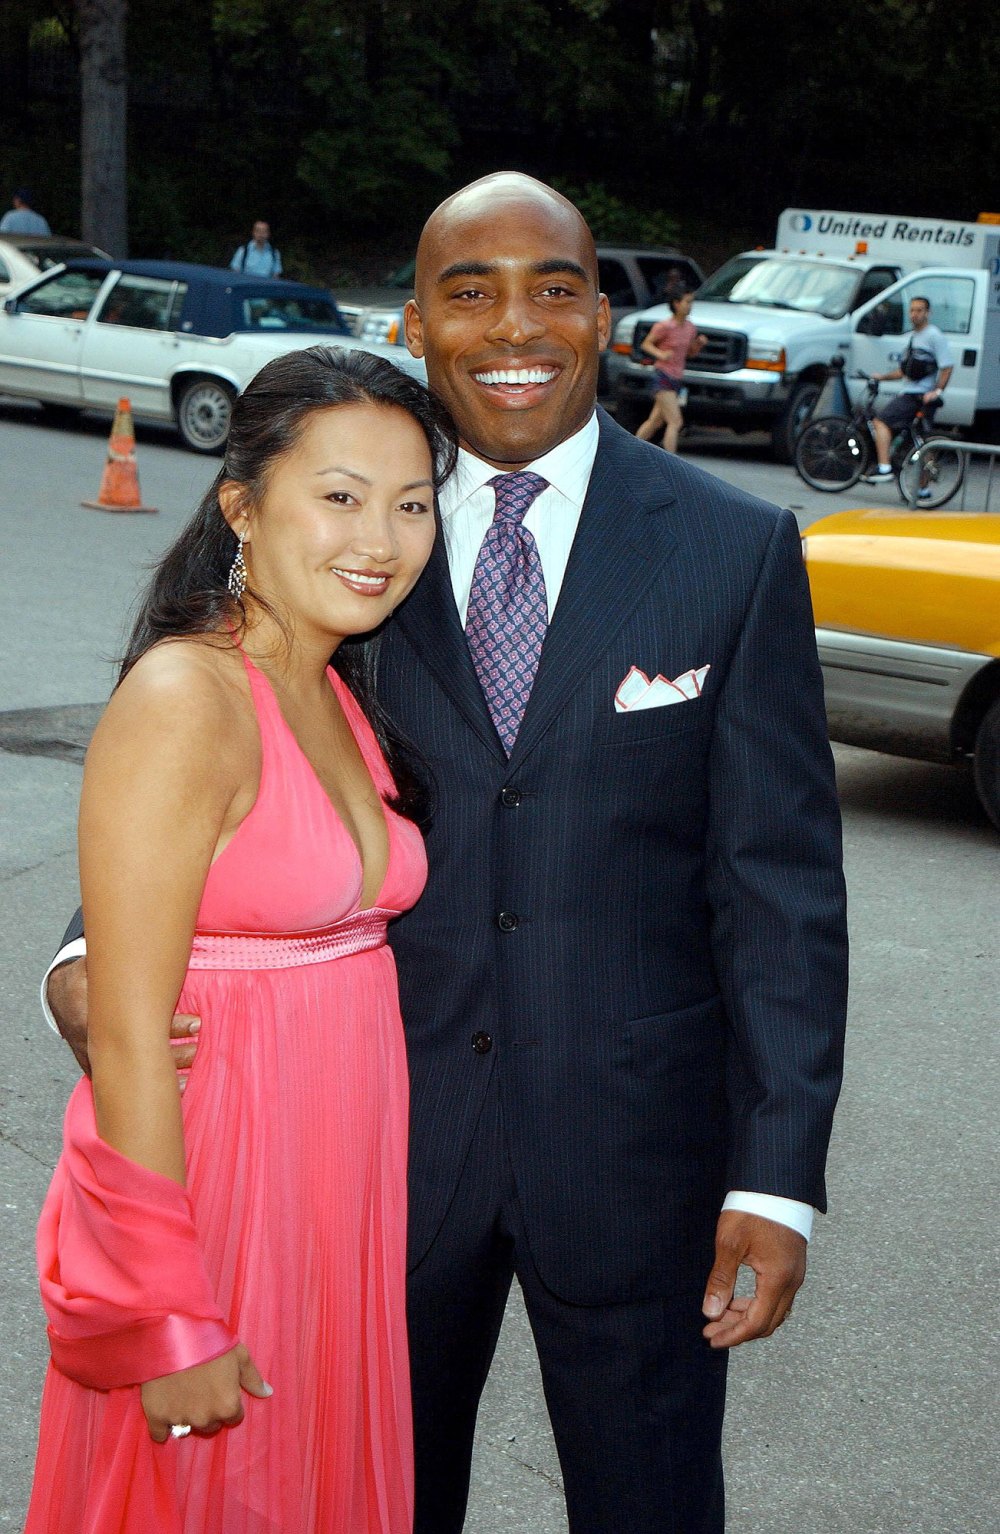 Tiki Barber’s Pregnant Wife “Devastated” by Intern Affair: Report